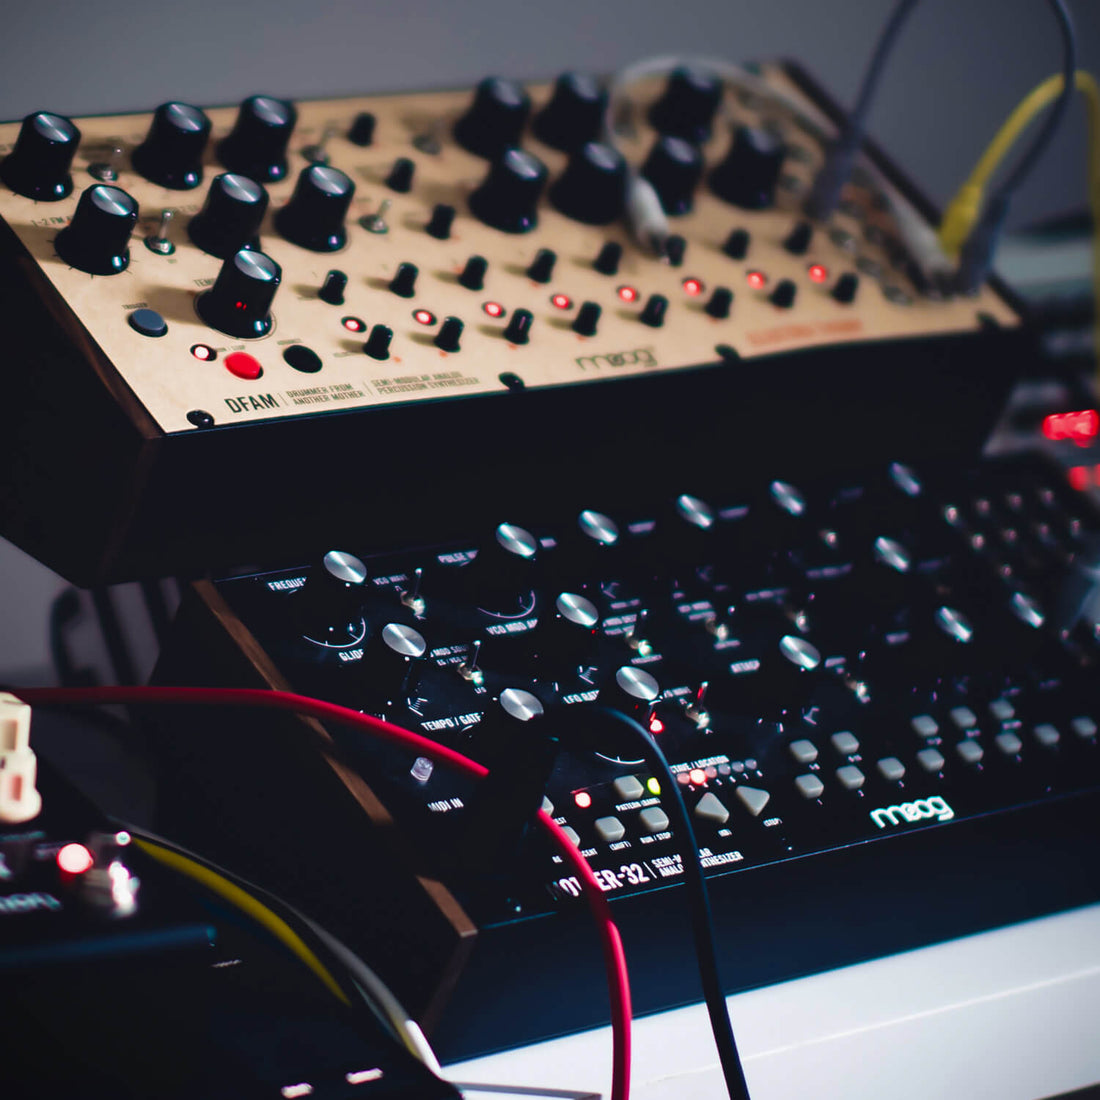 What are LFOS and What do synthesiser components do?